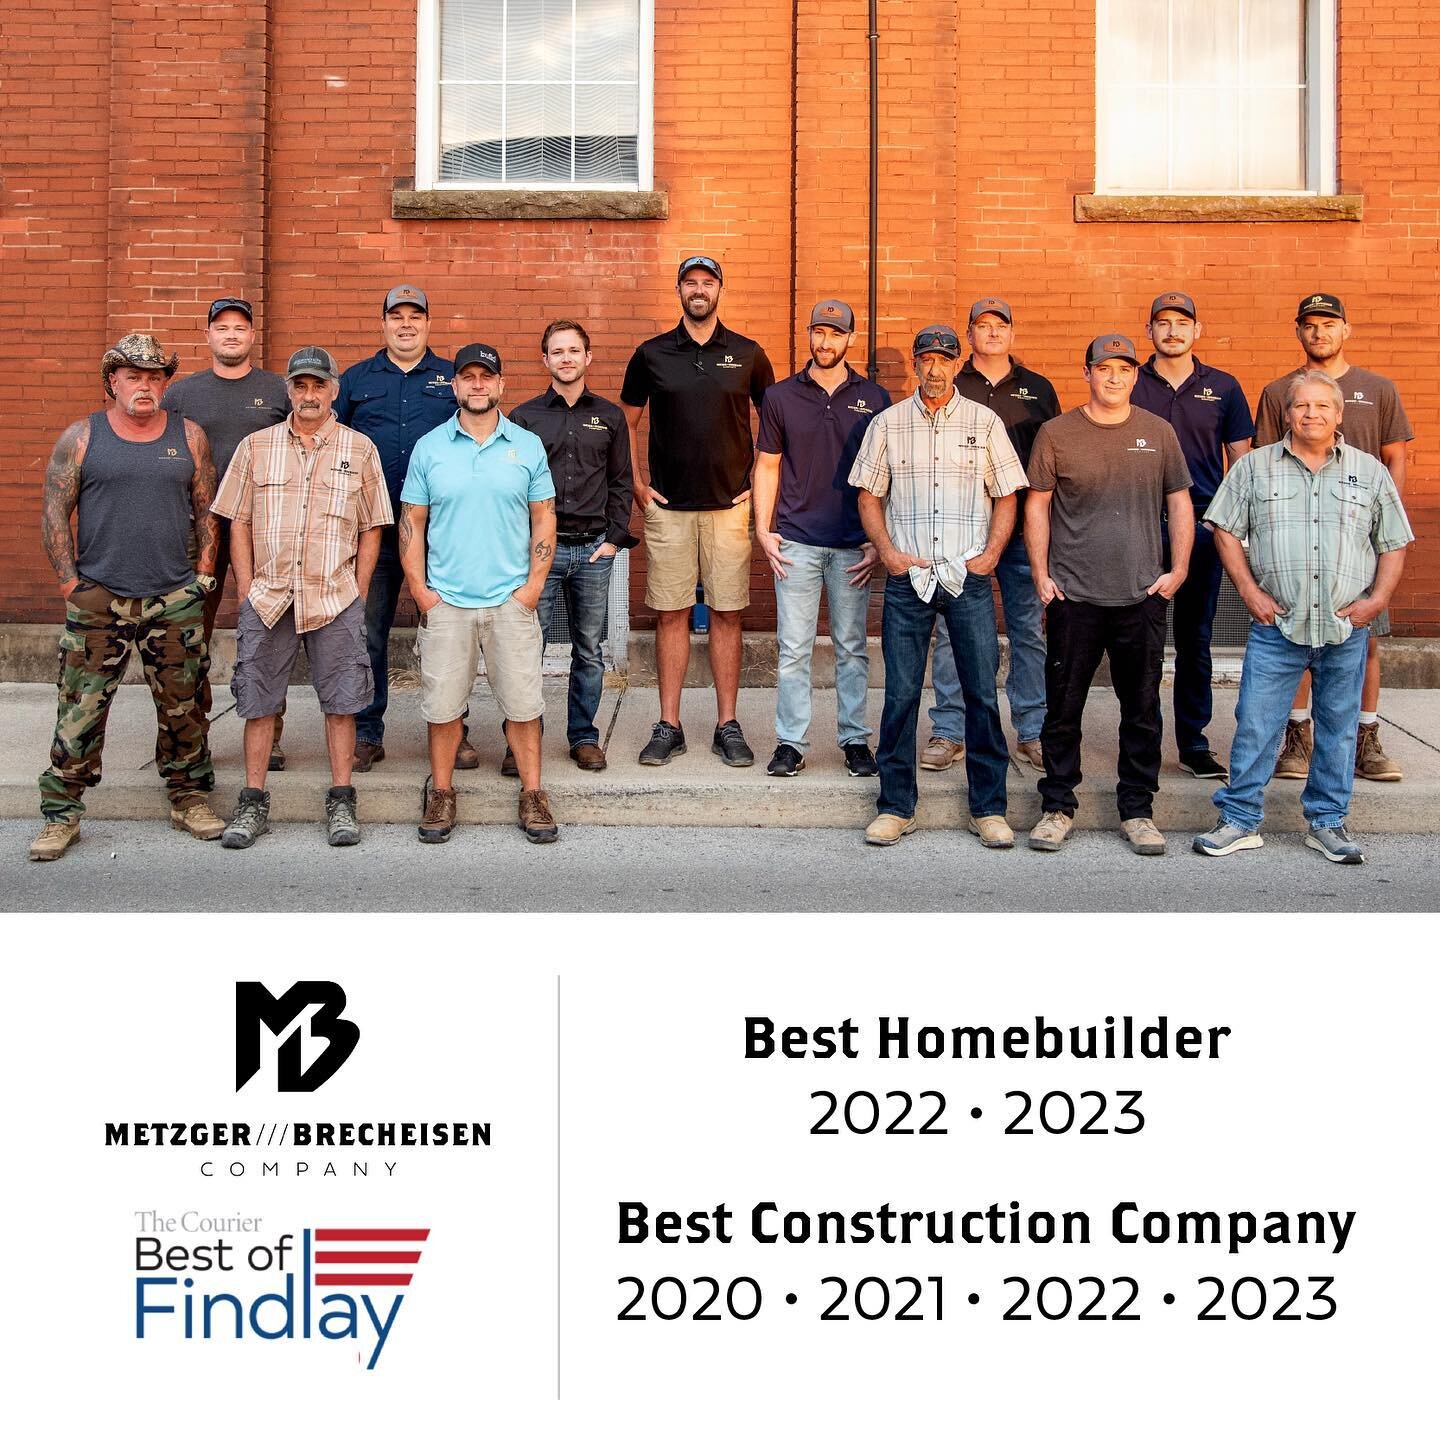 We would like to thank those who took their time to vote for MBCo. in the Courier's &quot;Best of Findlay 2023.&quot; We are excited to announce that MBCo. was voted &quot;Best Homebuilder&quot; for the second year in a row and the &quot;Best Constru